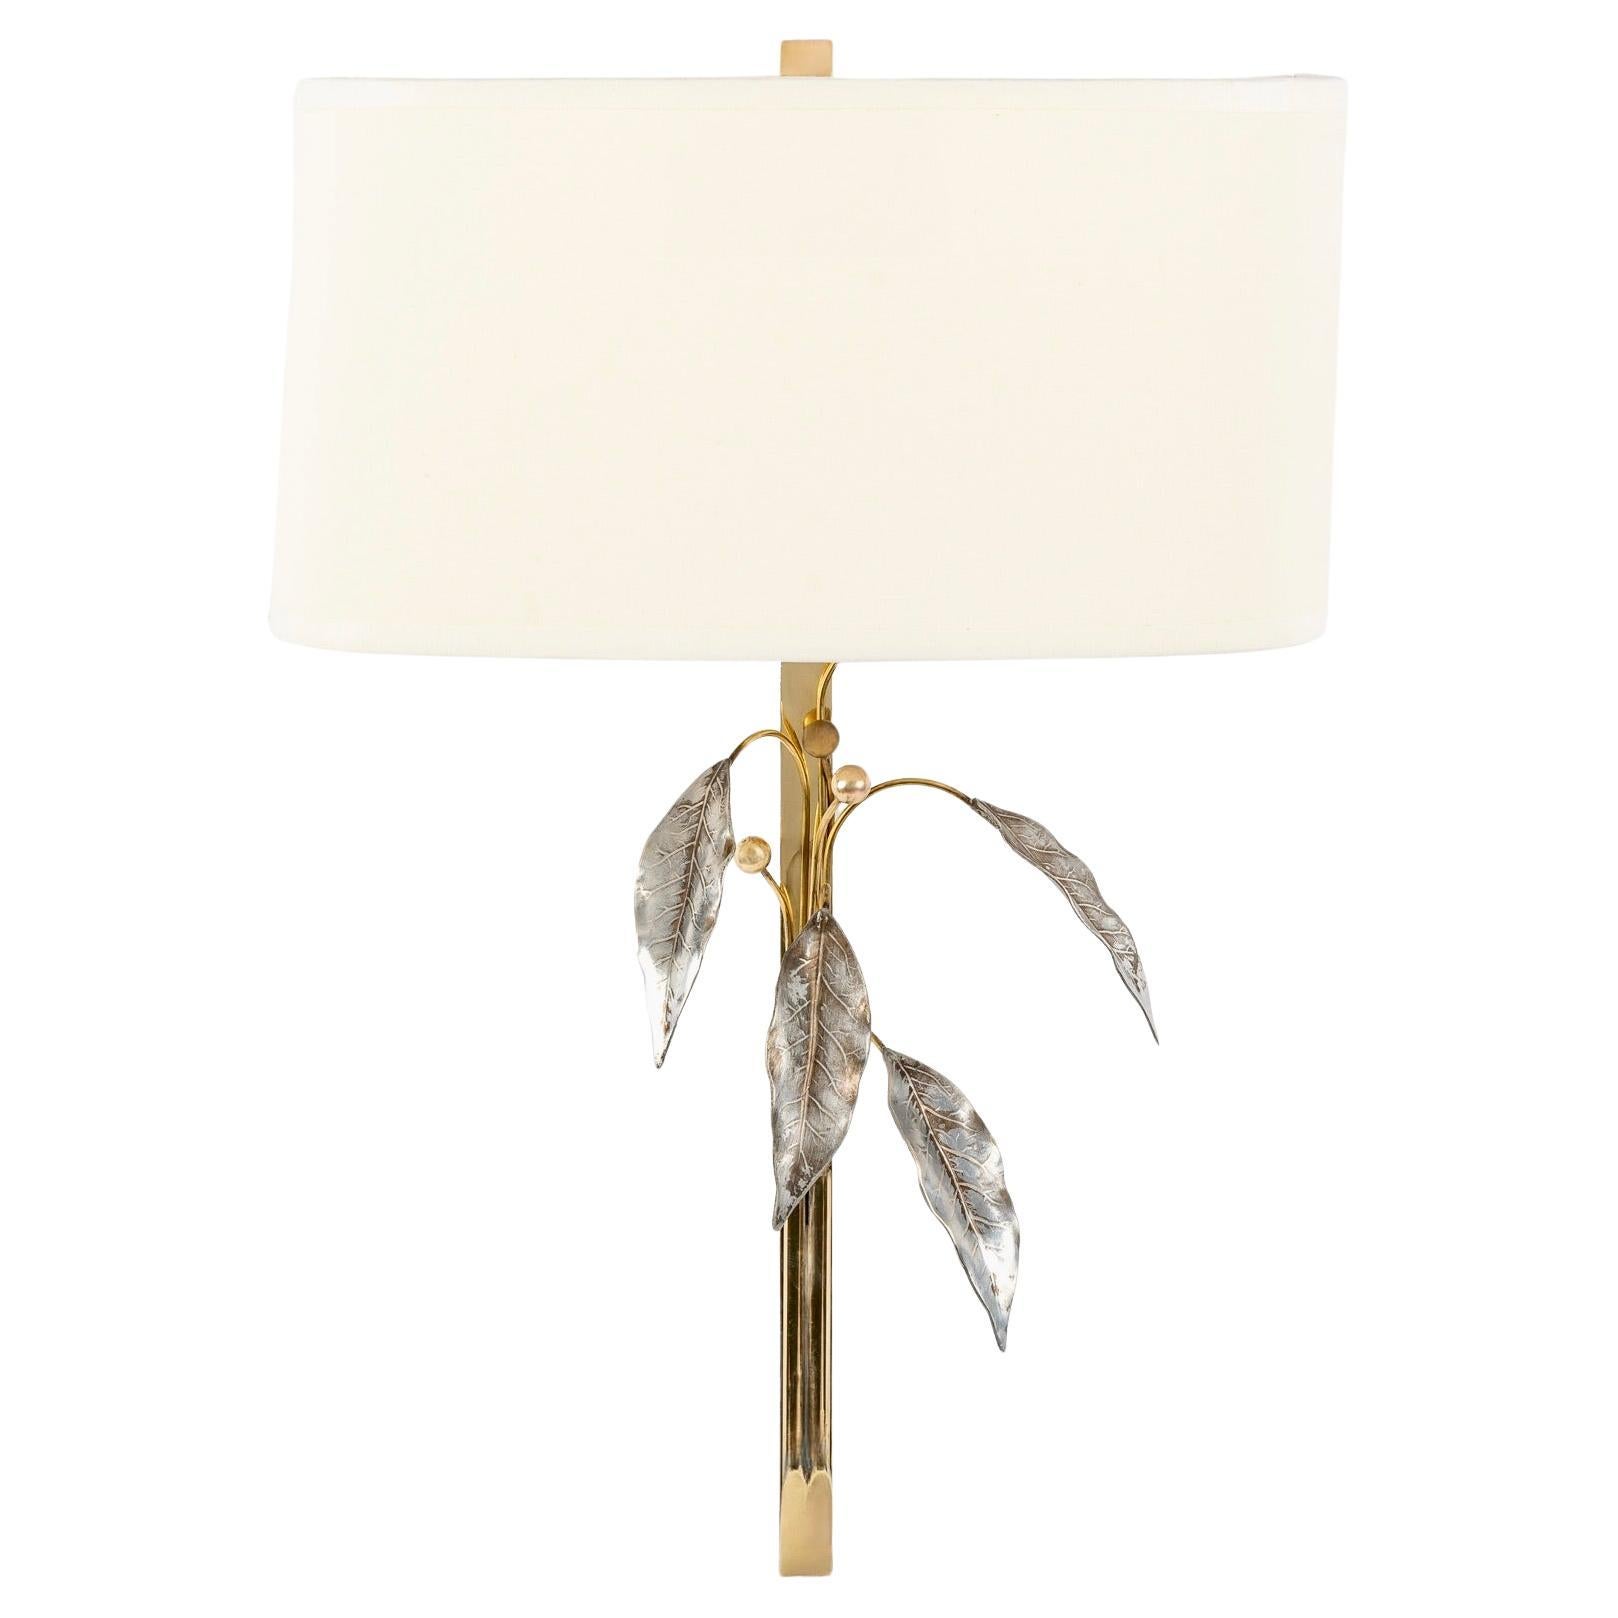 Composed of a gilded brass rod decorated and embellished with silver foliage and stylized flowers represented by gilded brass balls distributed on the front of the sconce.
Each sconce is dressed with a half shade of off-white cotton, custom made and